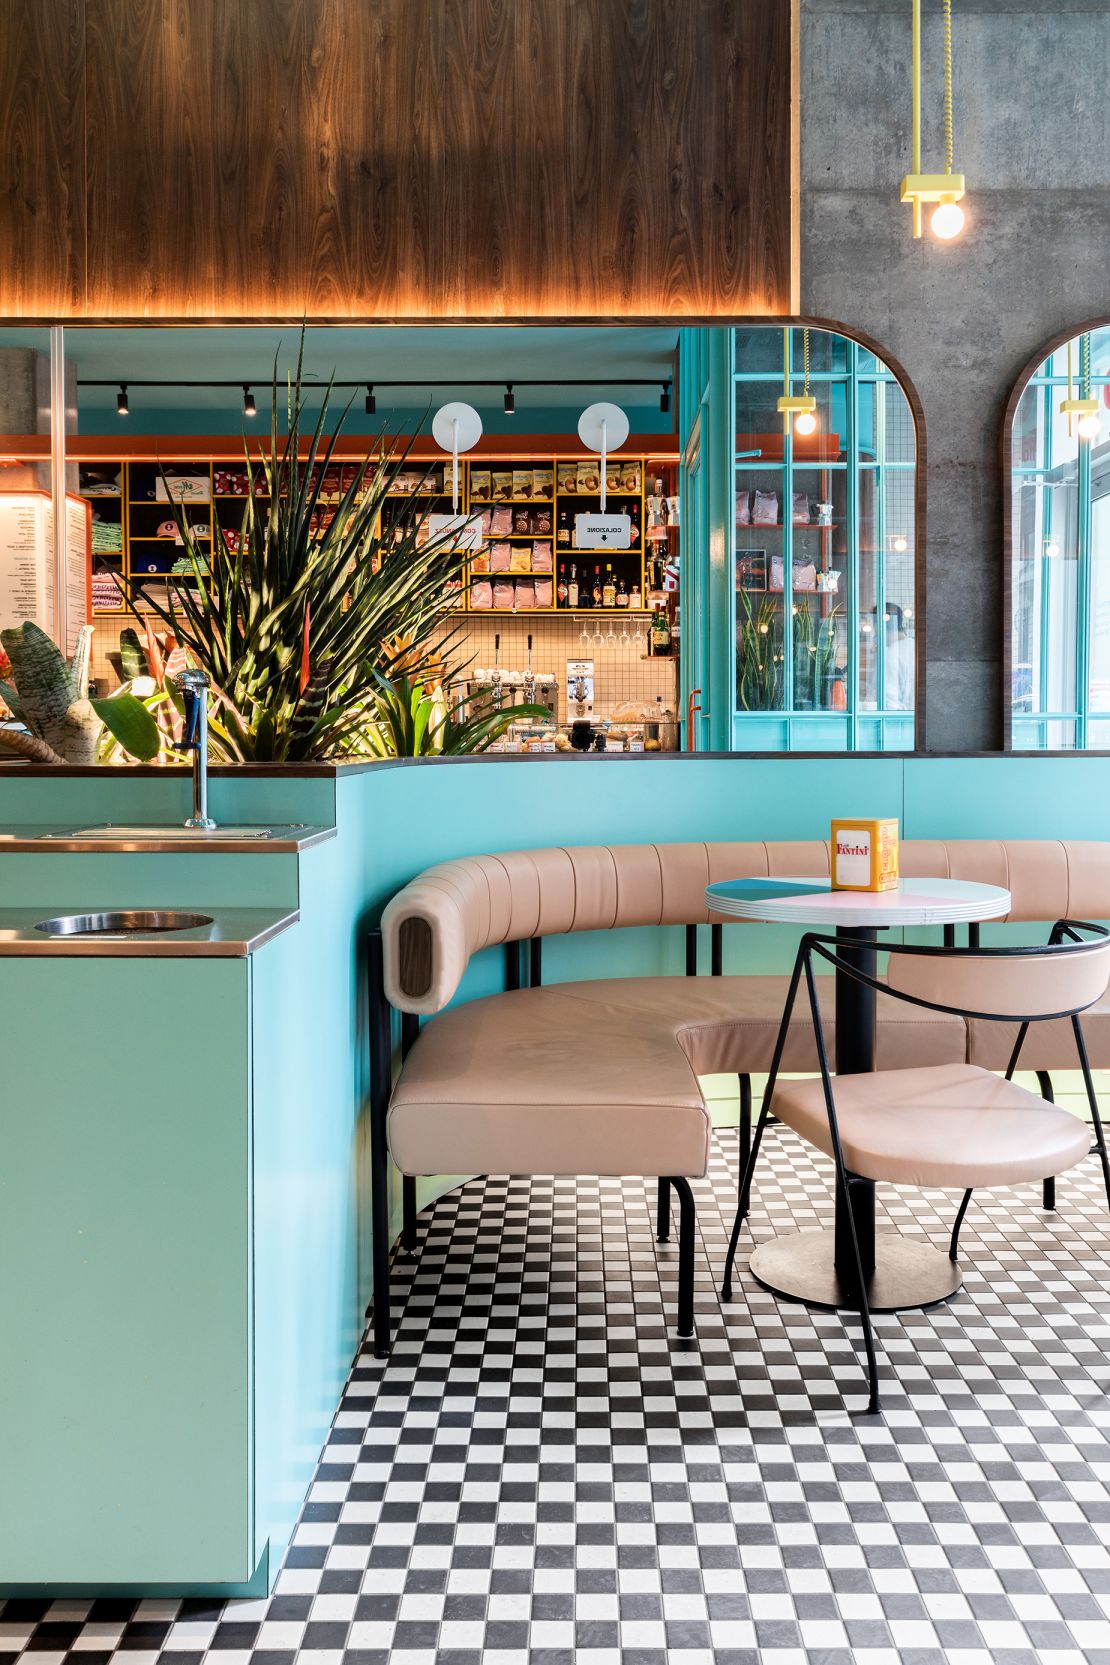 In an increasingly competitive coffee industry, coffee shop owners are putting thoughts into how their spaces are designed. For some that means quirky, bold designs — like Caffettiera in Montreal, Canada, pictured above, a bright space with blue and green hues and faux wooden panels. ‘90s-era books, stickers, toys and photos can be found throughout.